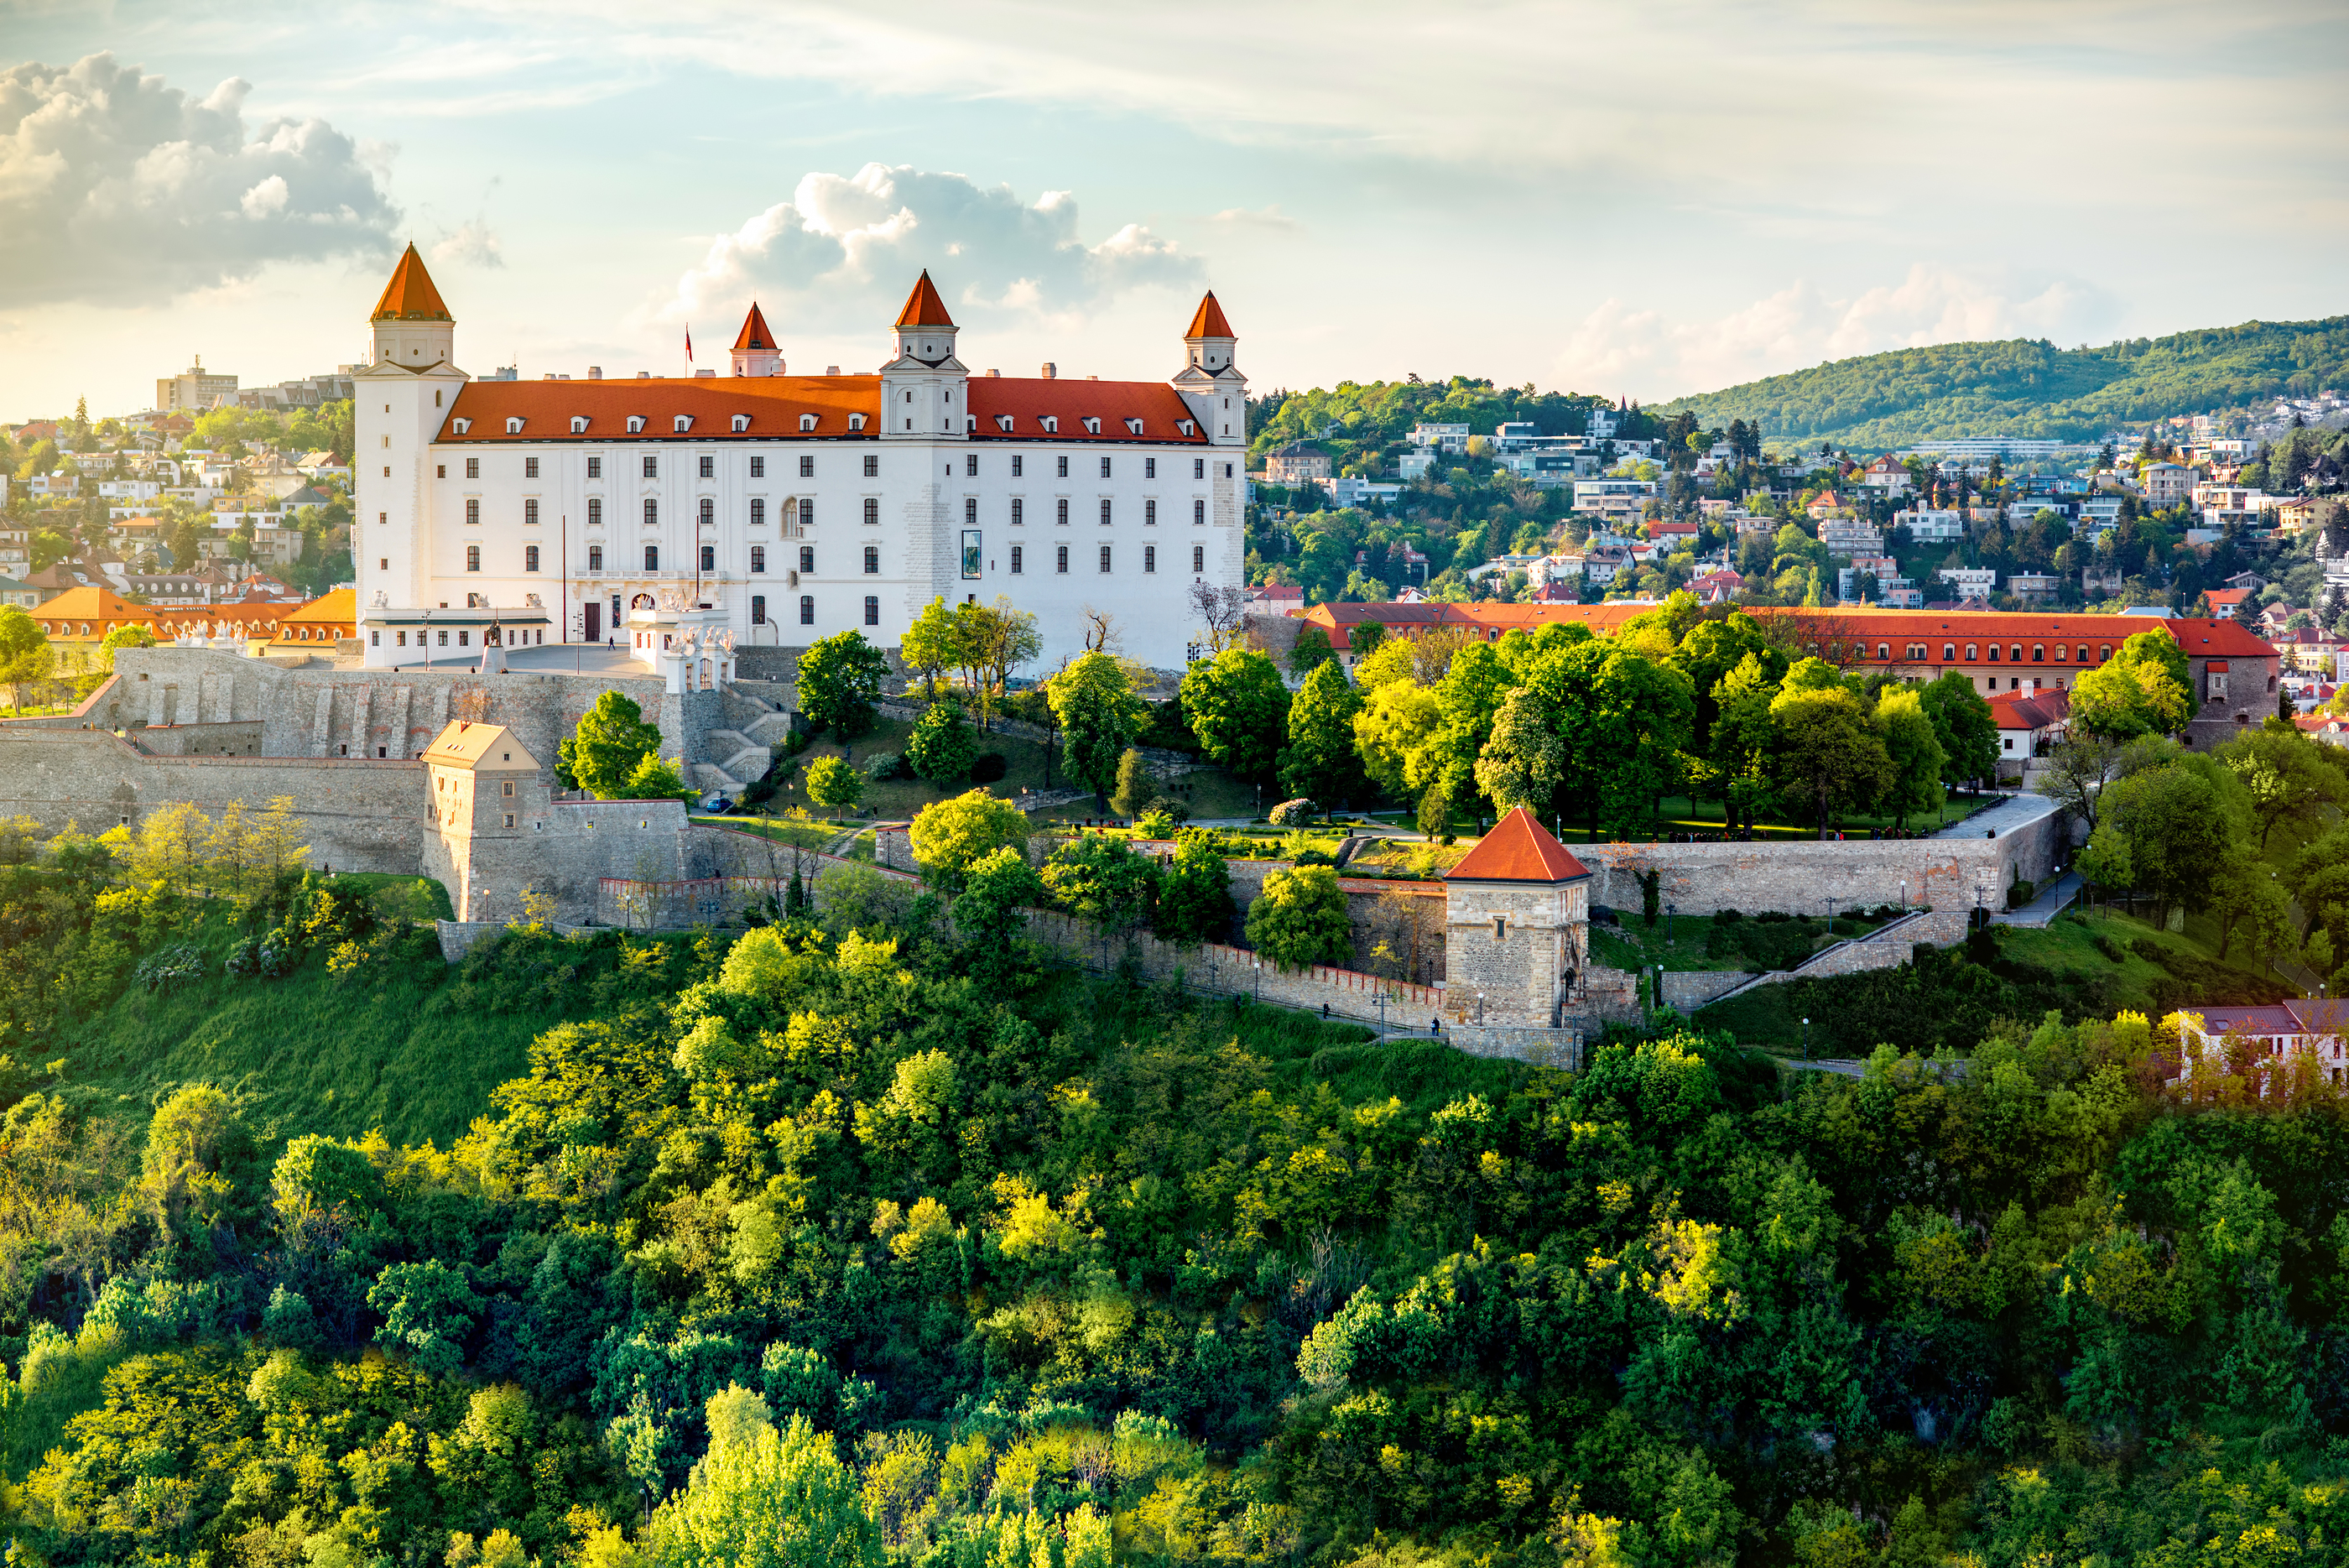 Slovakia Photos | Featured Pictures & Beautiful Images Of Slovakia